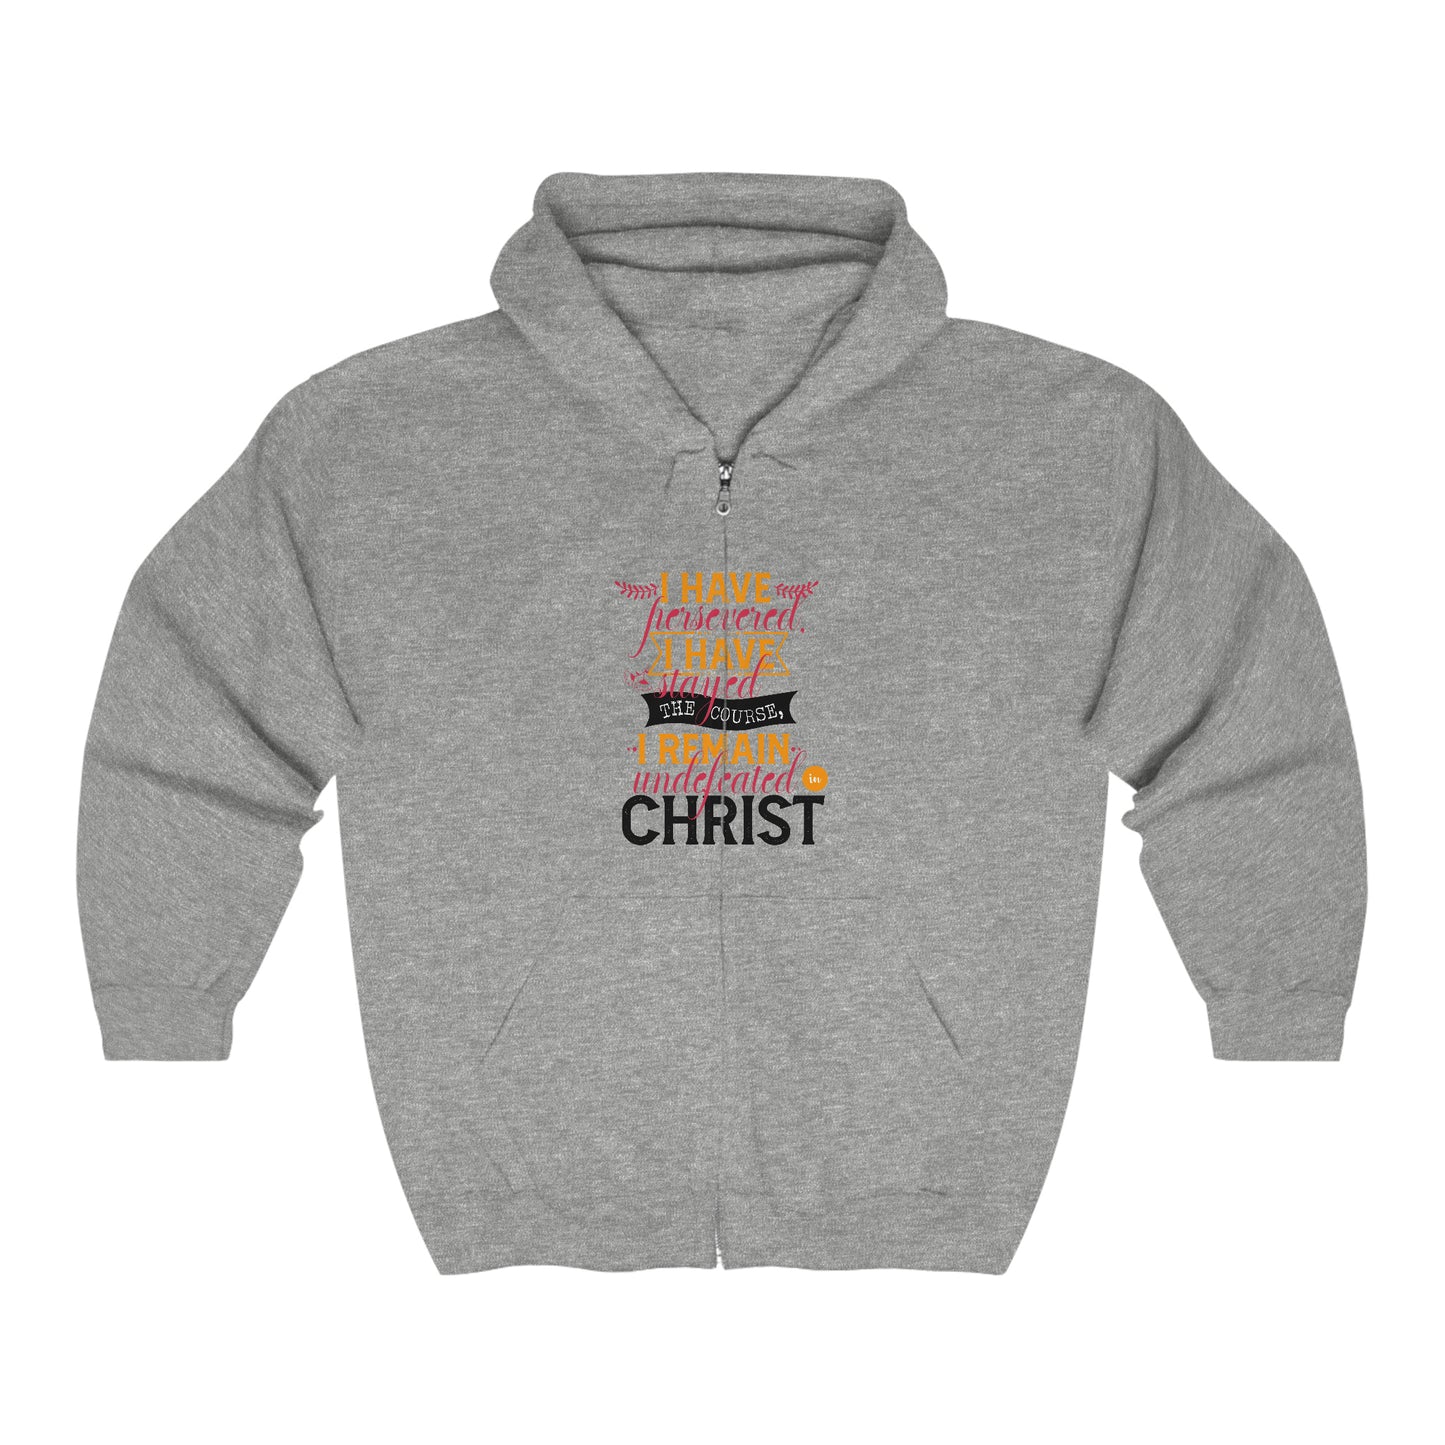 I Have Persevered I Have Stayed The Course I Remain Undefeated In Christ Unisex Heavy Blend Full Zip Hooded Sweatshirt